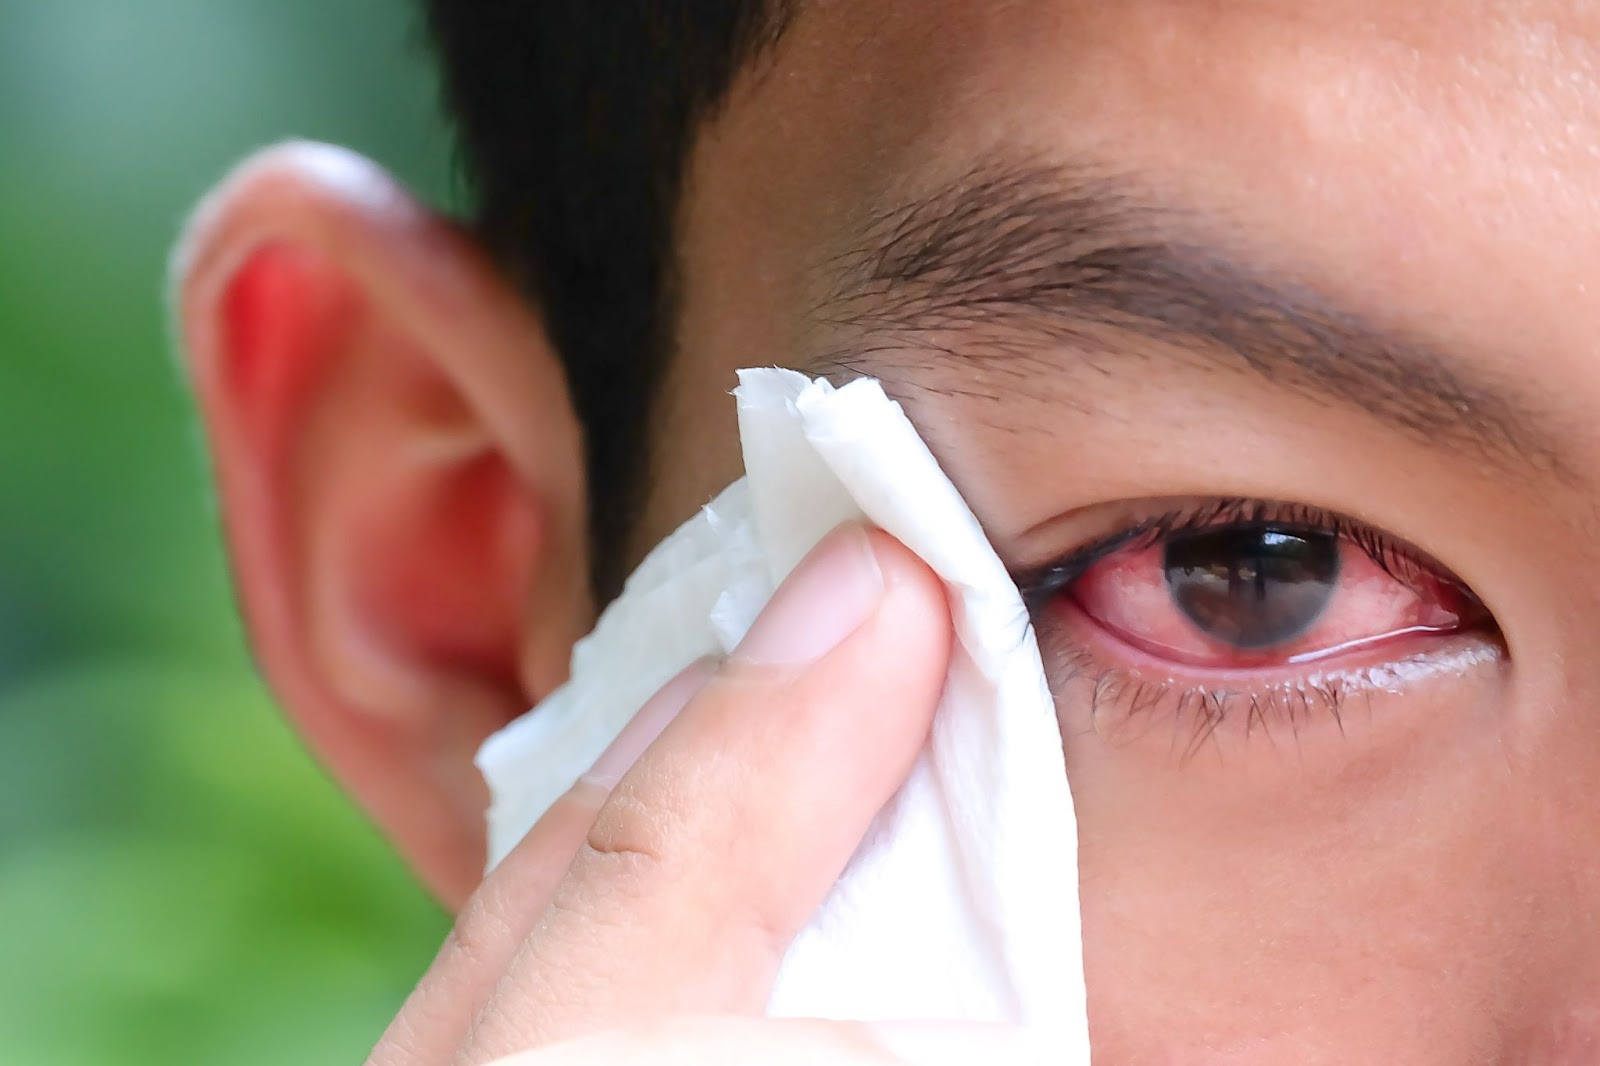 Madras EYE (Conjunctivitis) – Symptoms, Types and Treatments